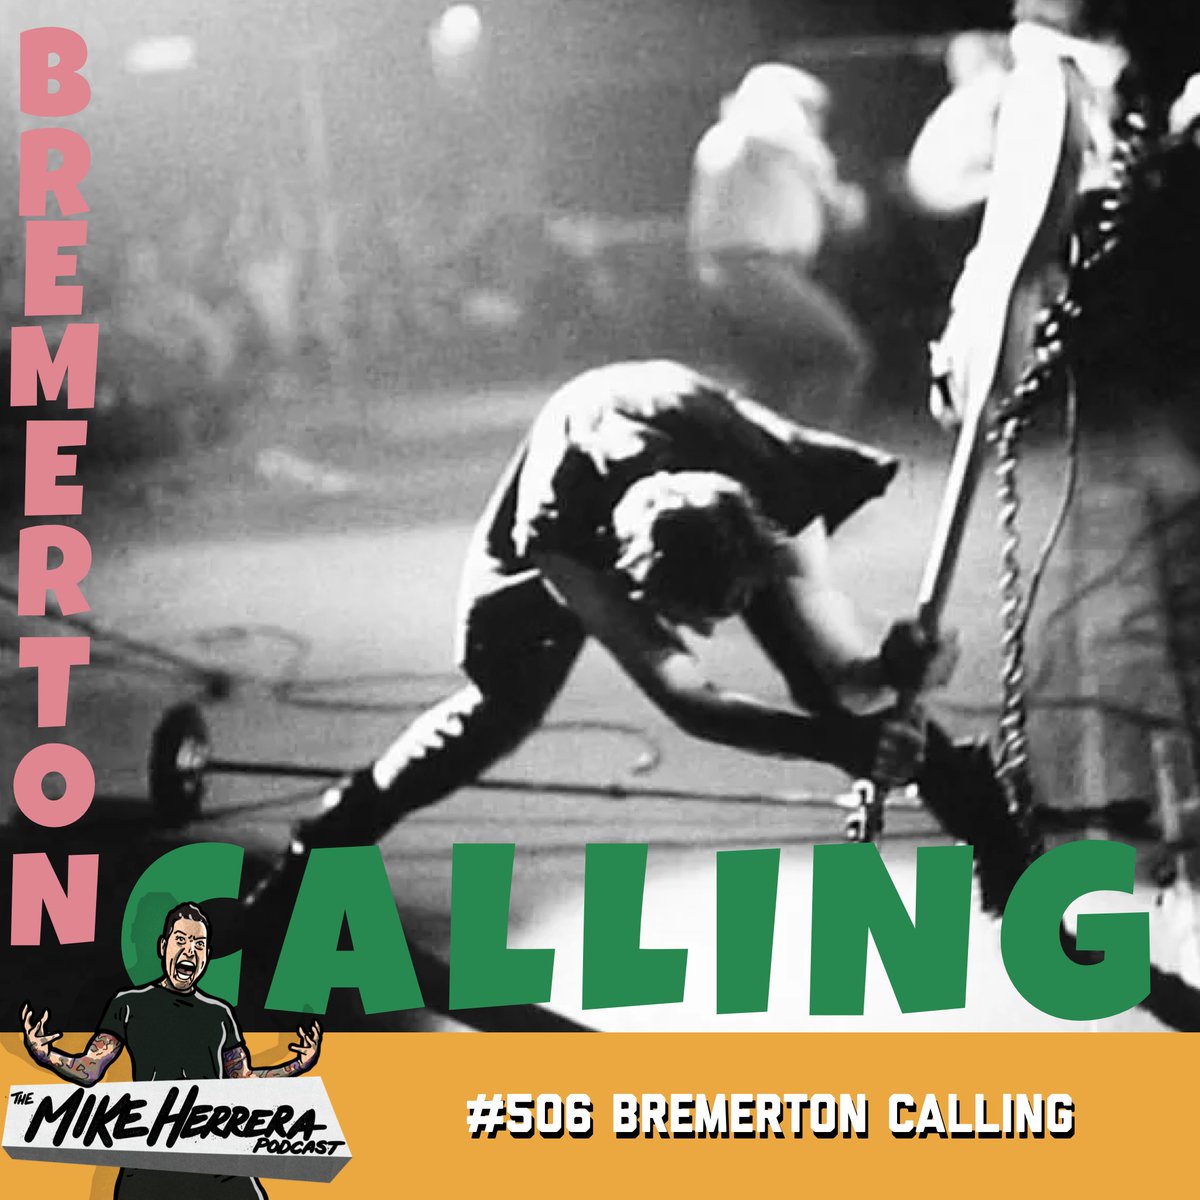 #506 Bremerton Calling Denver and Salt Lake City weekend recap, MxPx and The Ataris live in Bremerton, WA SOLD OUT! Listening to your own voice recordings, Songwriting what feels good to sing, Behind the lyrics, Is it hard to be a billionaire? is.gd/IAbmJH